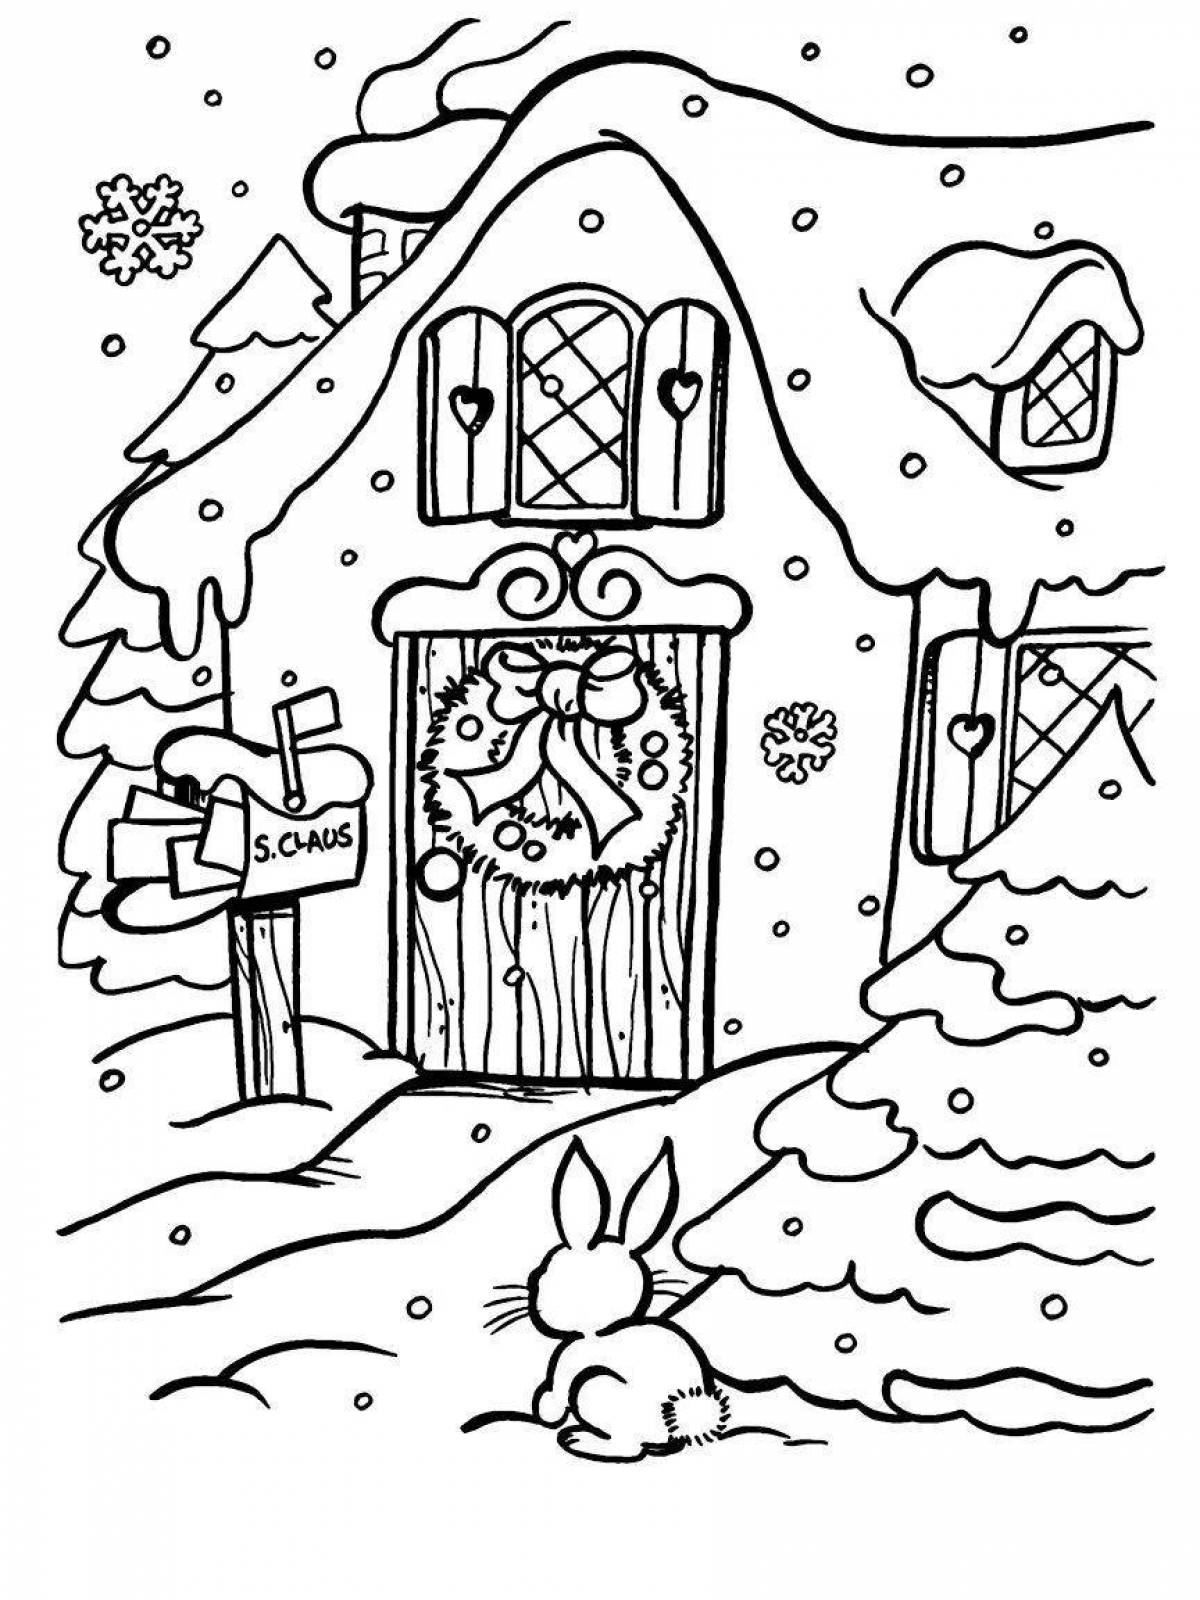 A fascinating Christmas coloring of the house